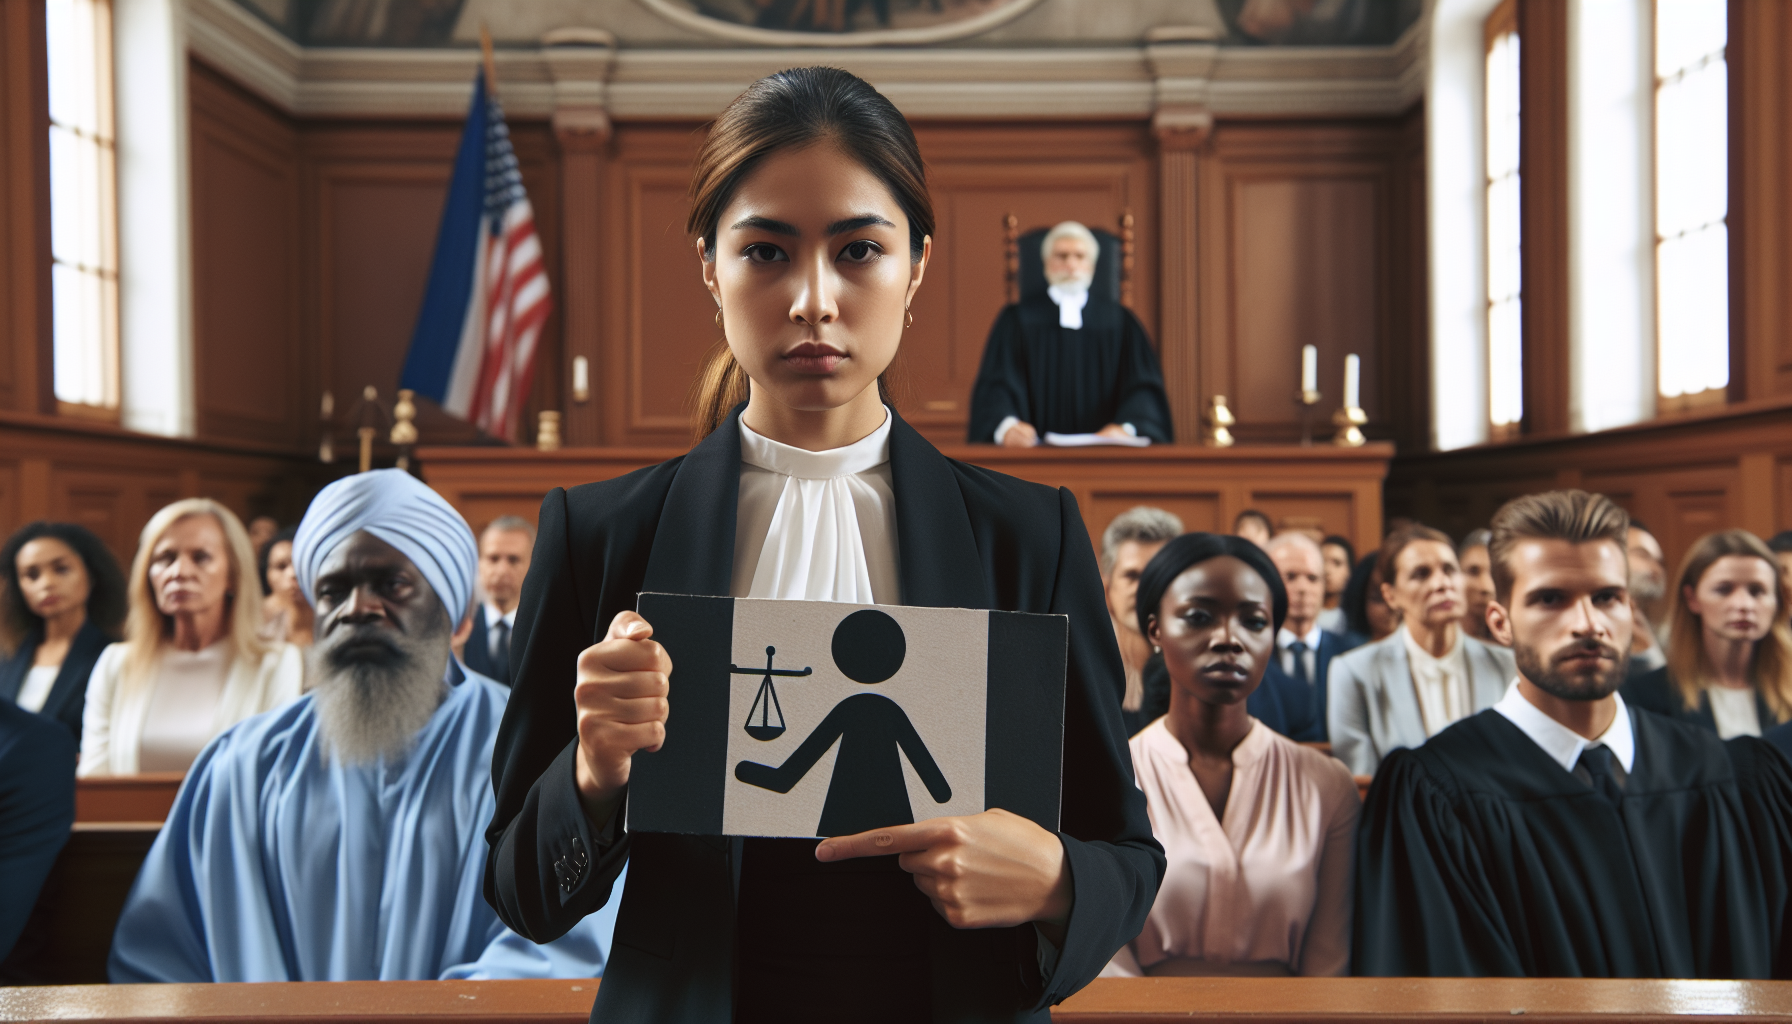 Illustration of a person holding a 'human rights' sign in a courtroom